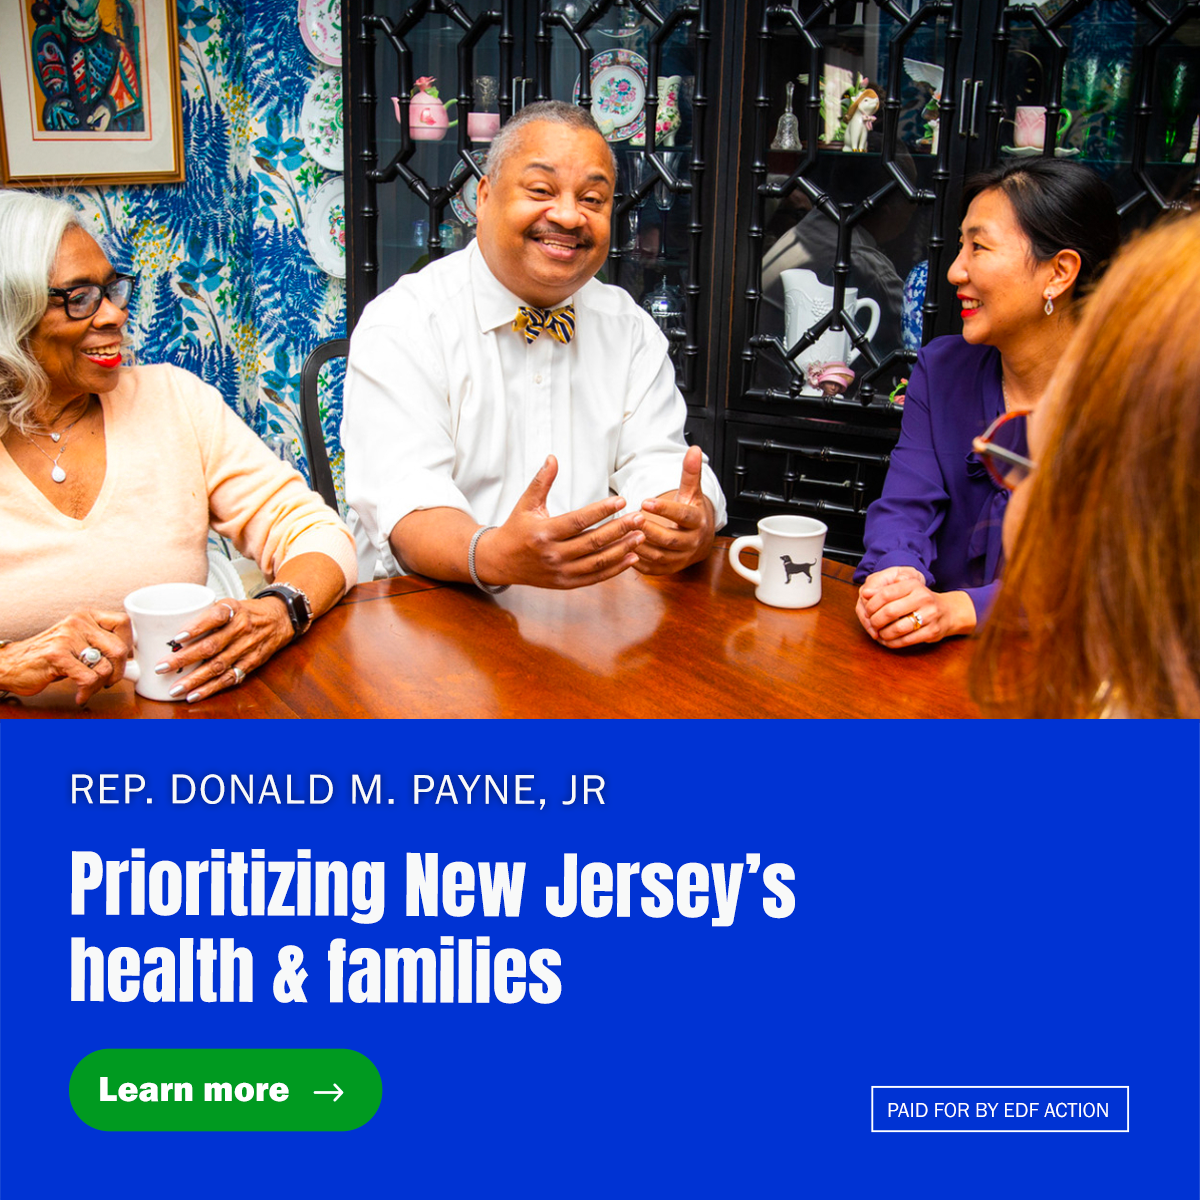 Rep. Payne, Jr. Prioritizing New Jersey's Health &amp; Families